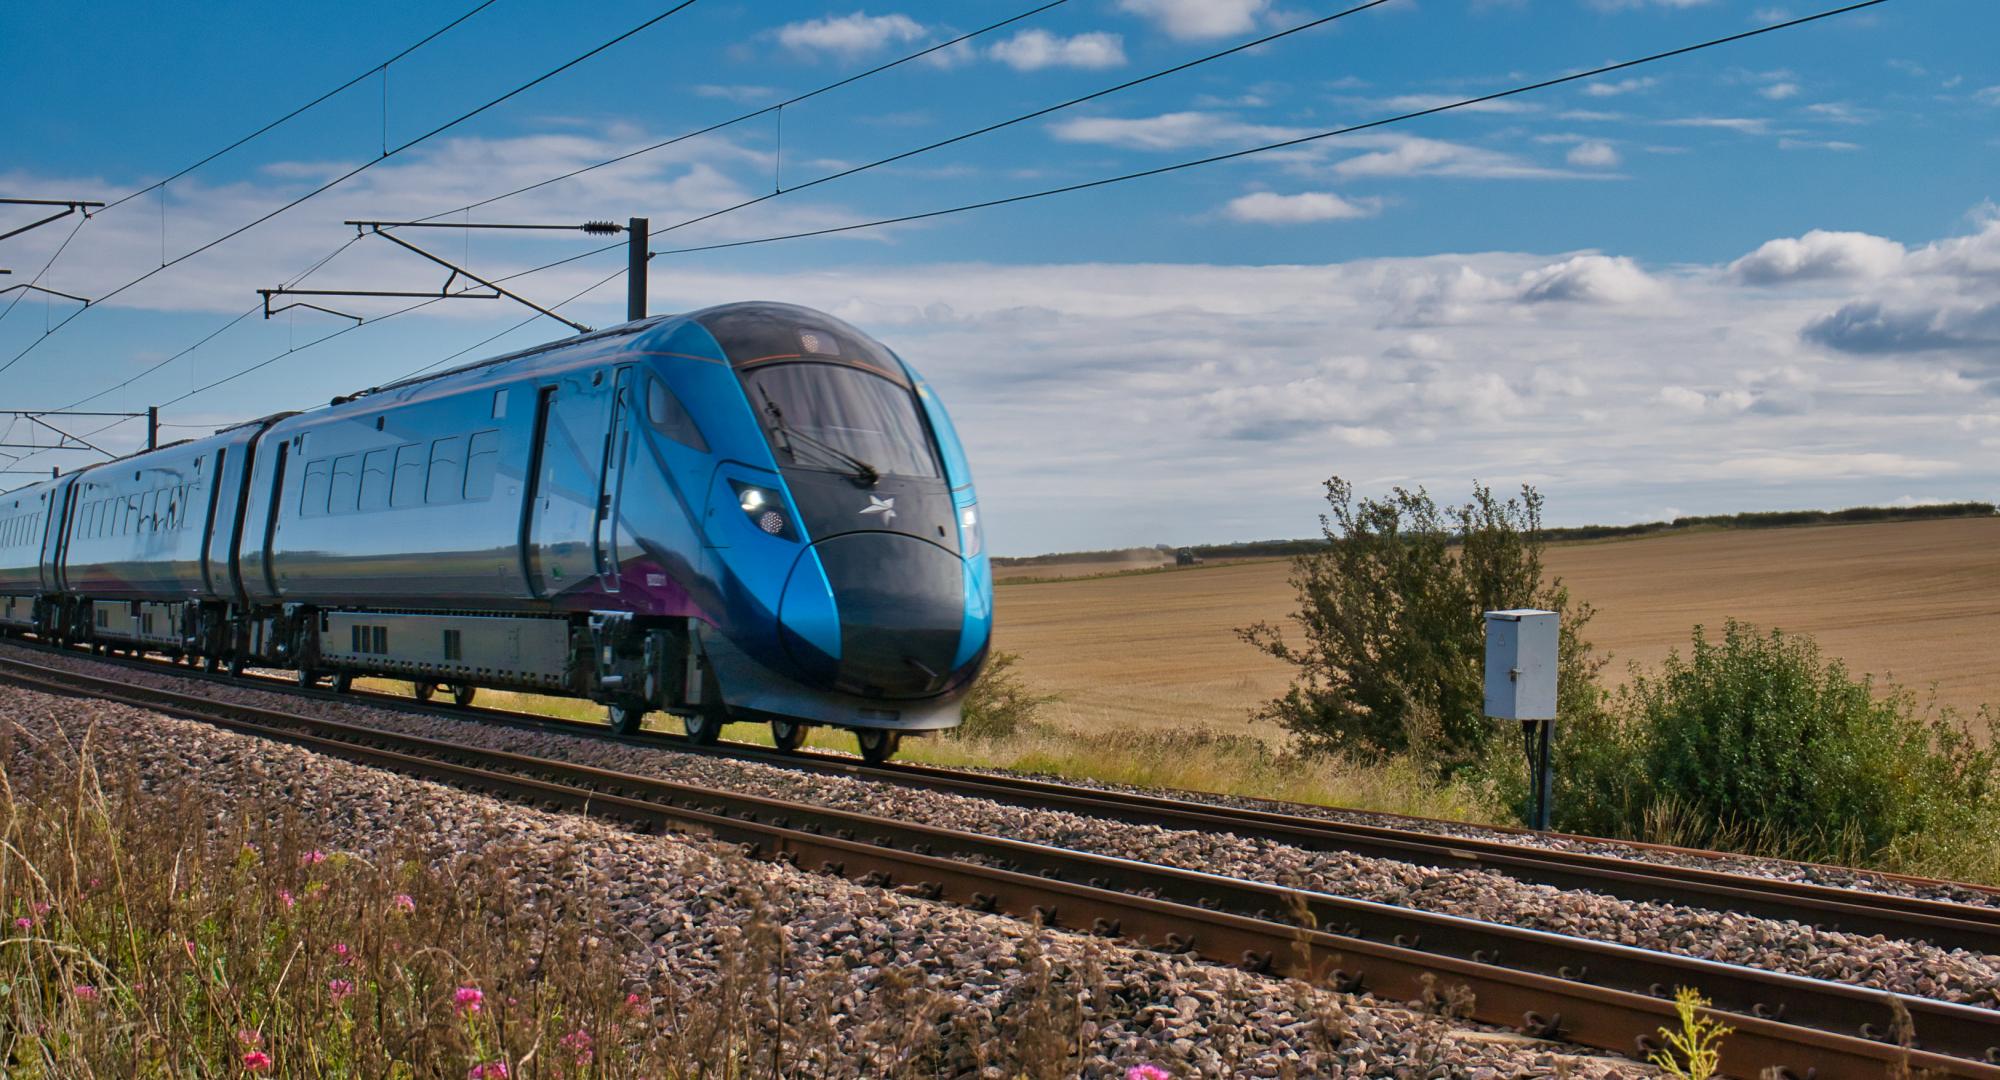 Transpennine Express train travelling at speed in Northumberland, UK - taken on a sunny day with white clouds.